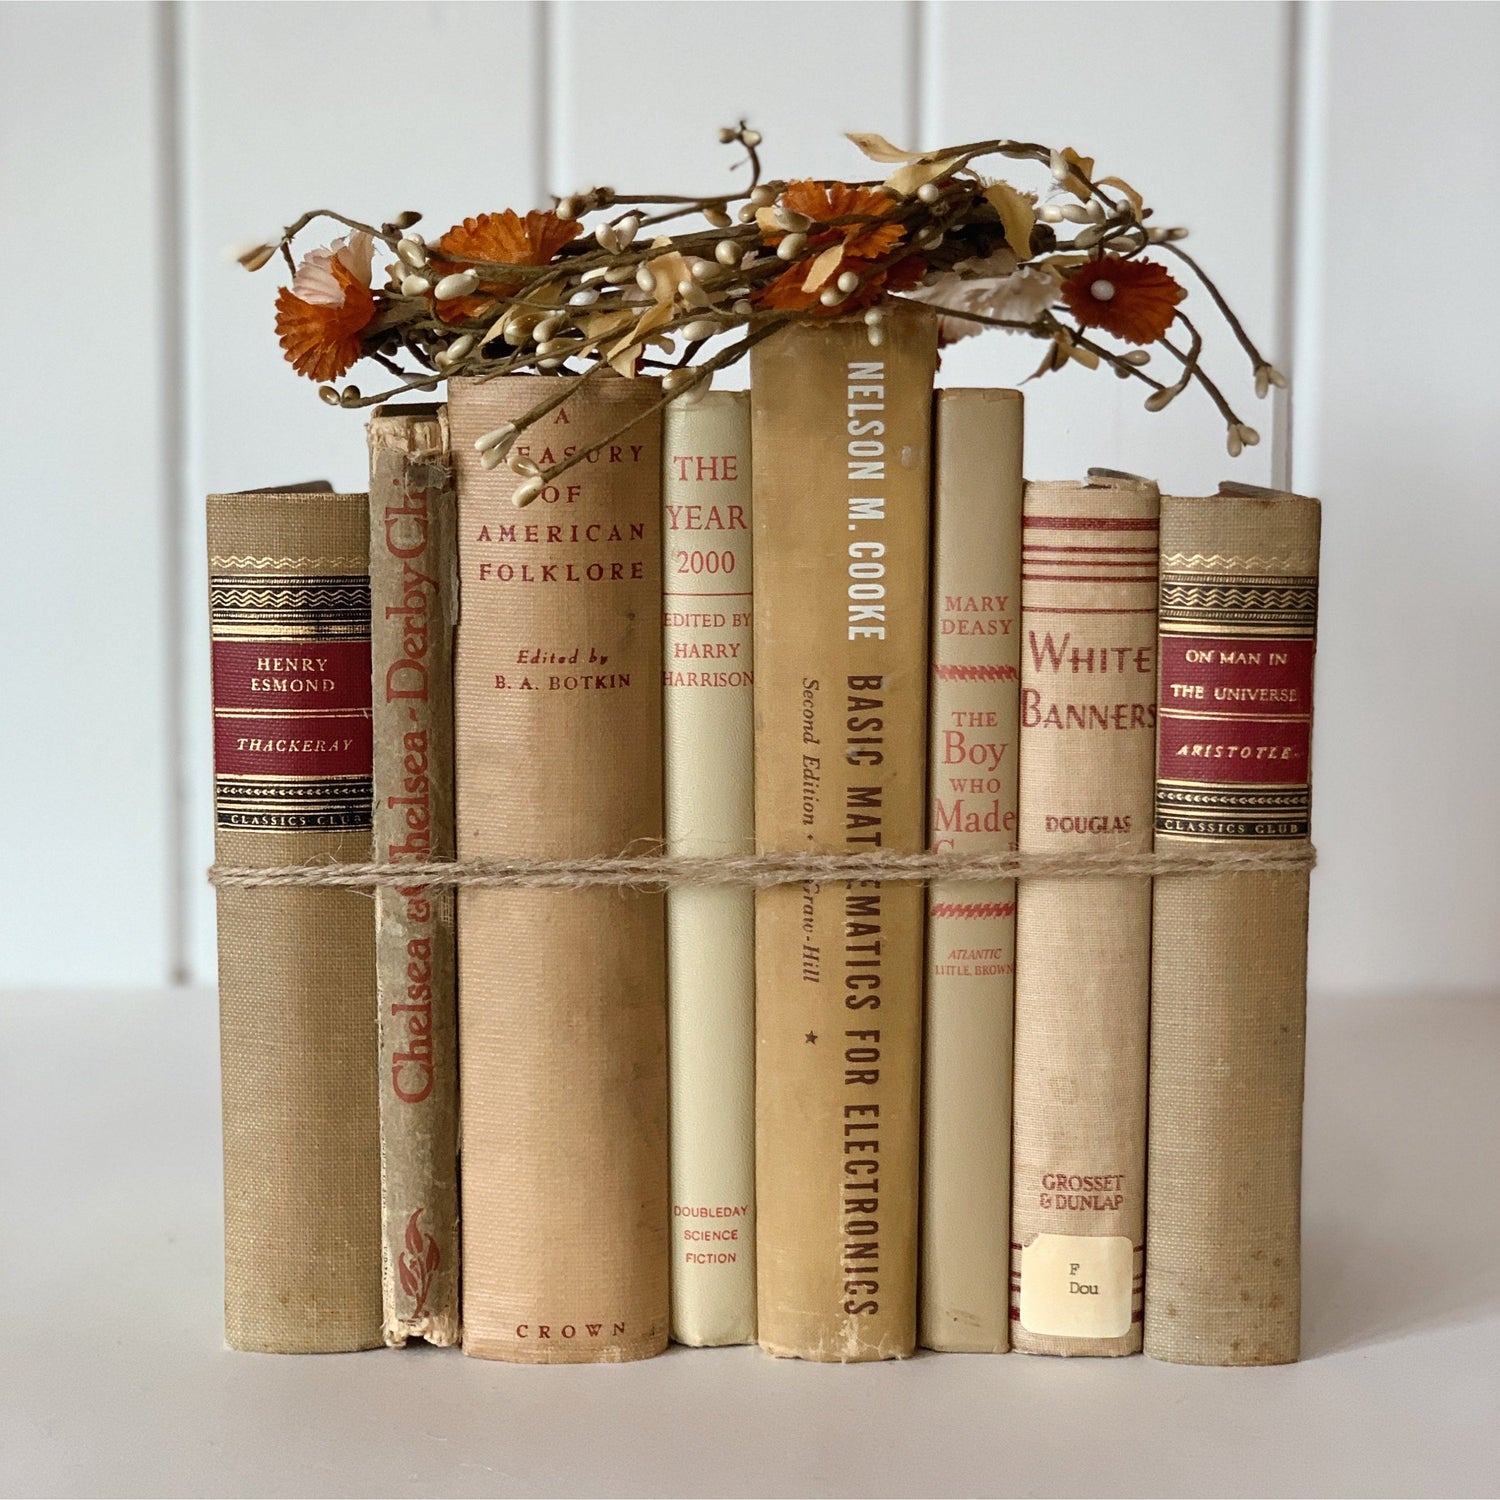 Beige and Red Book Collection, Vintage Decorative Books, Mid-Century Modern Handmade Decor, Cozy Faded Neutral Book Set for Shelf Styling